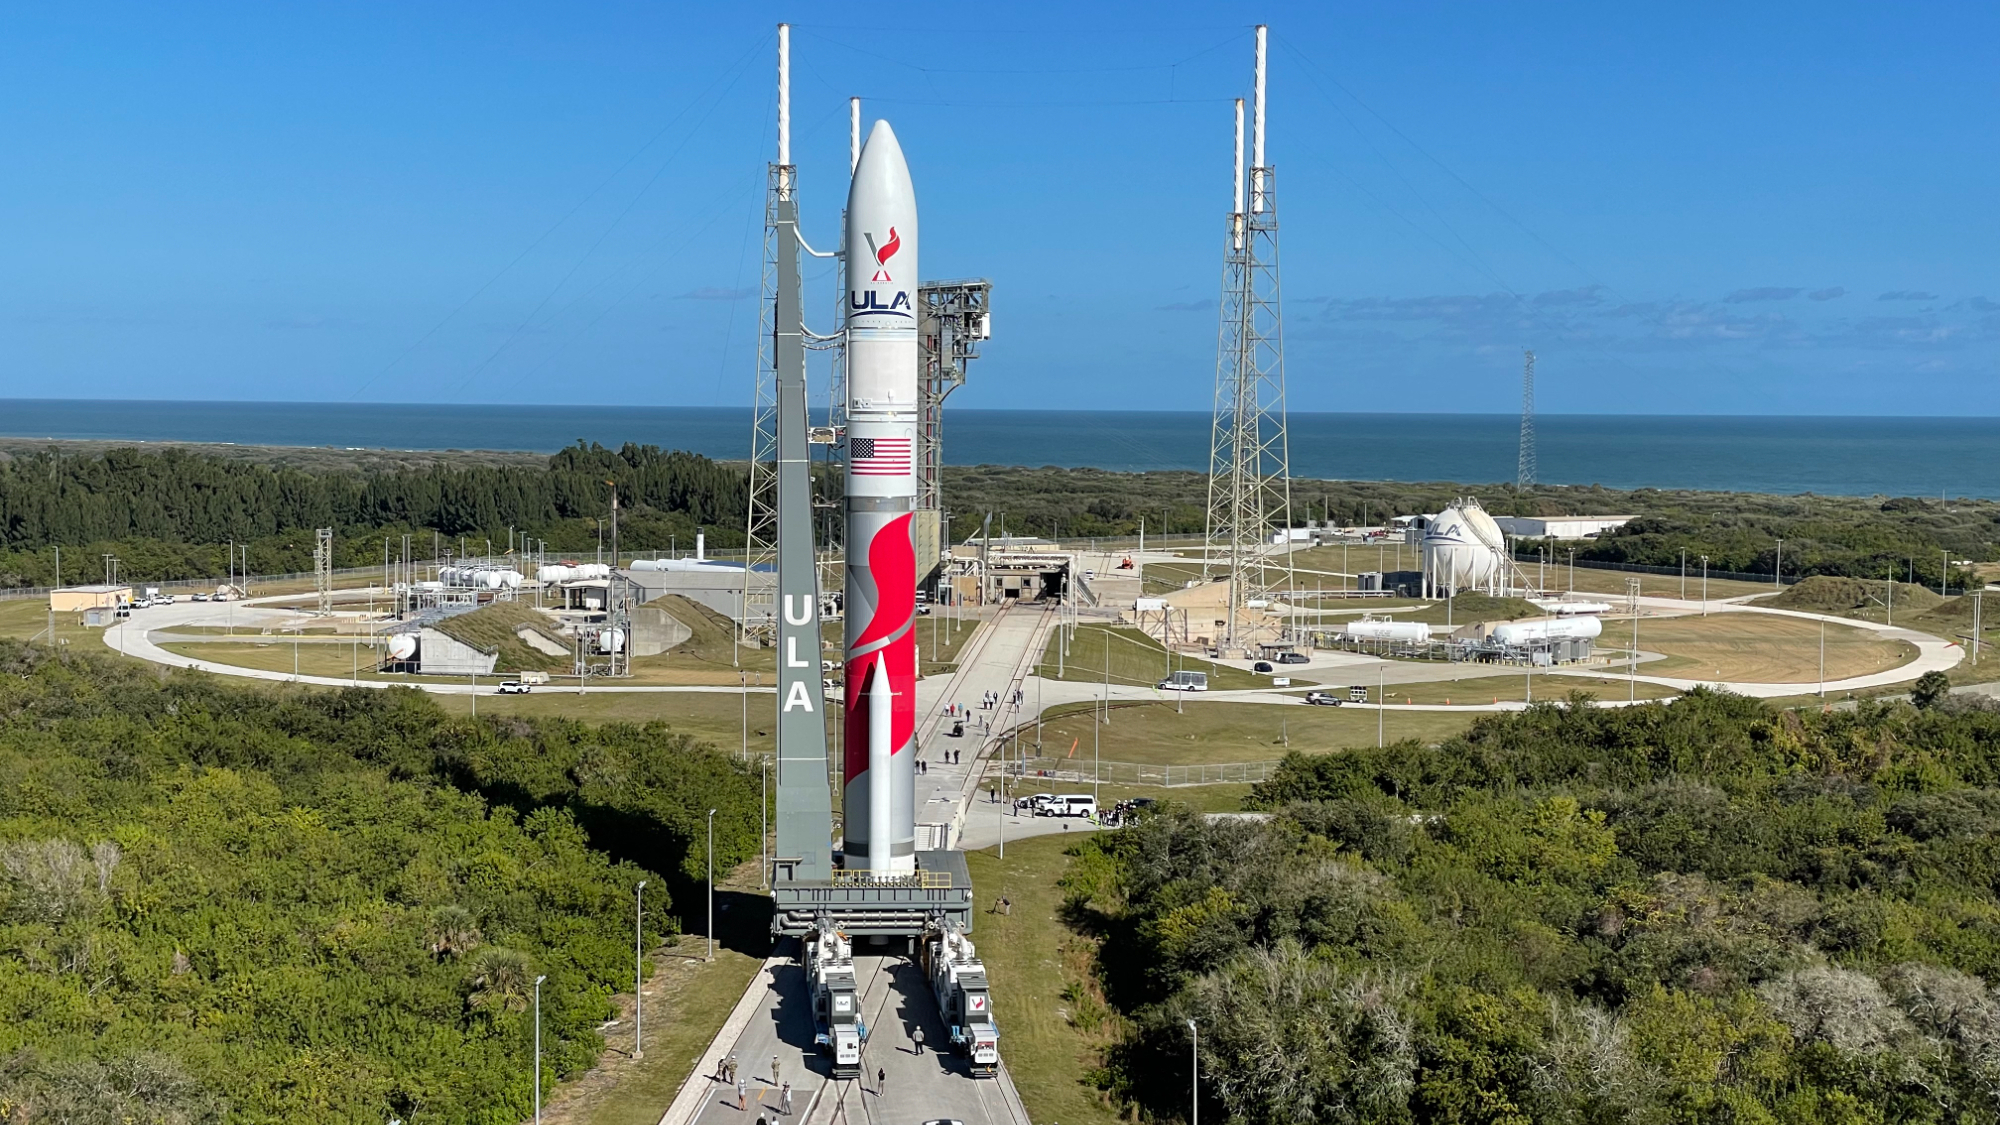 Red and white rocket standing on launch pad with ocean in background.